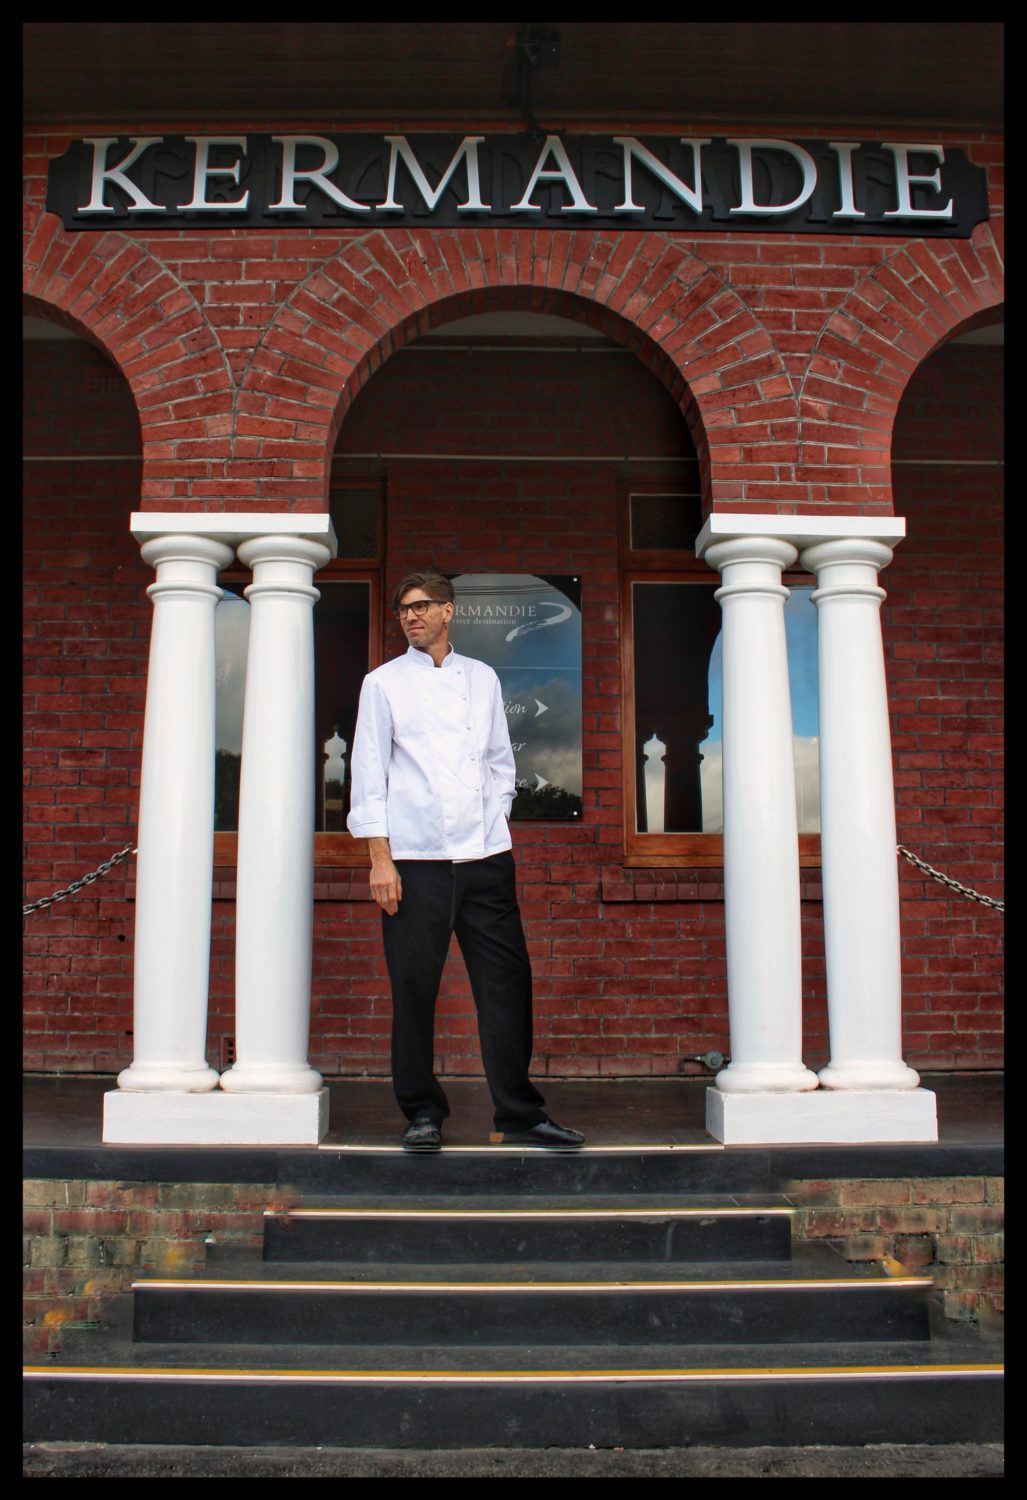 Chef David on some steps at the front of the Kermandie building in Port Huon